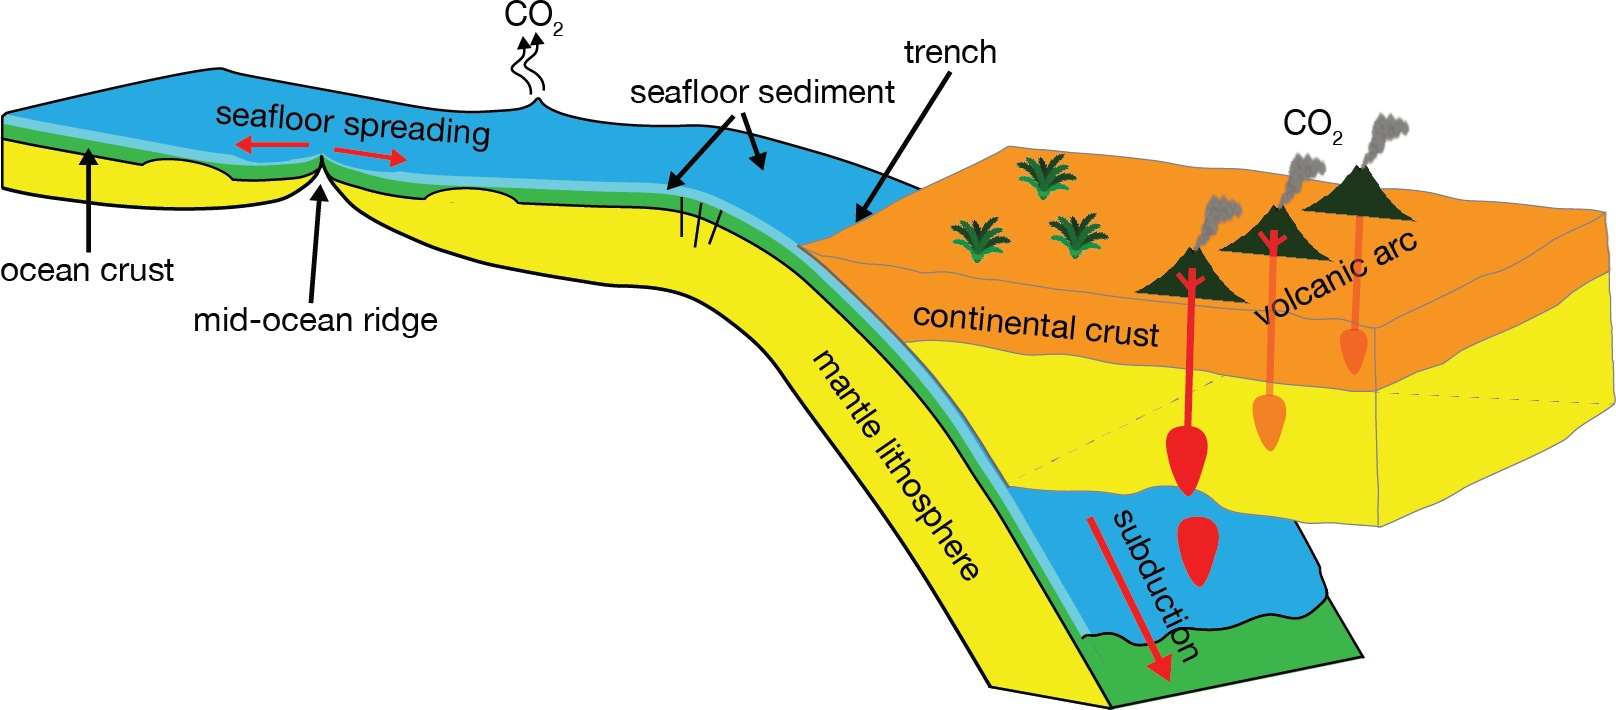 The Earth's tectonic carbon conveyor belt shifts massive amounts of carbon between the deep Earth and the surface, from mid-ocean ridges to subduction zones, where oceanic plates carrying deep-sea sediments are recycled back into the Earth's interior. The processes involved play a pivotal role in Earth's climate and habitability.